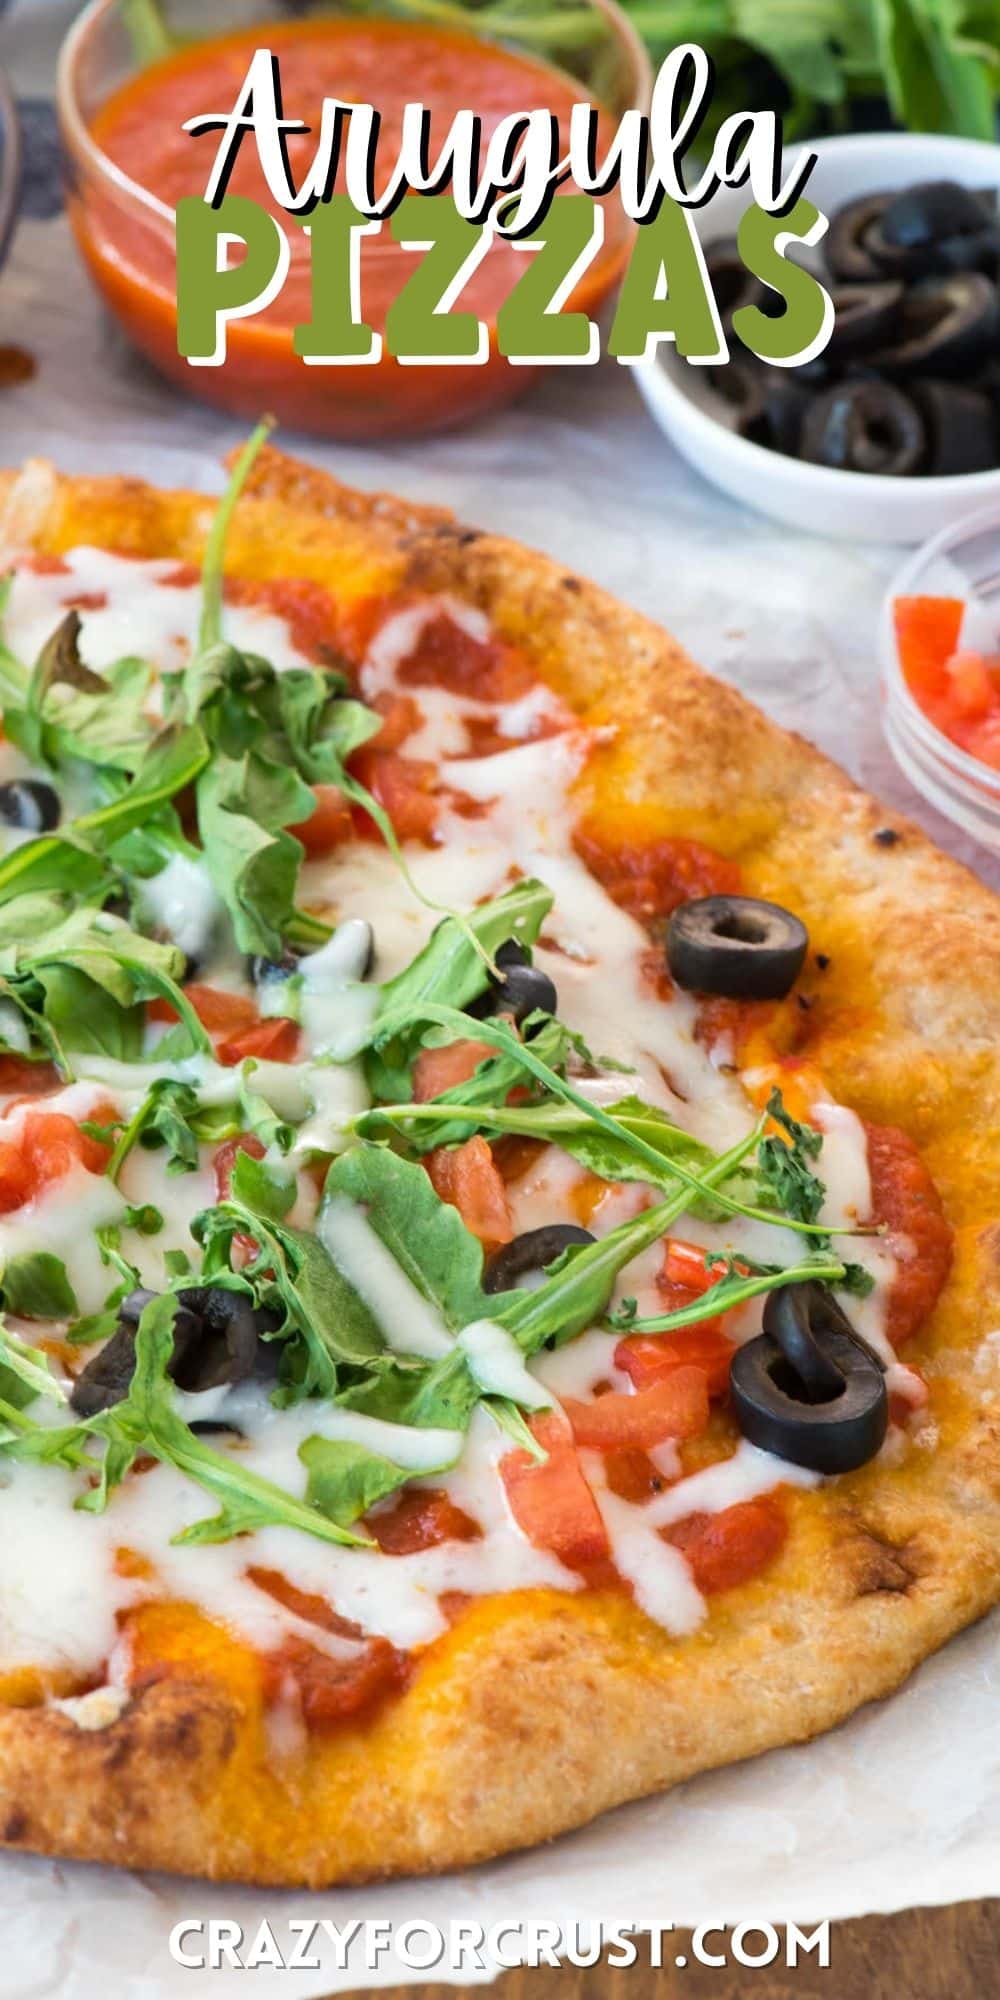 pizza with olives and arugula on top with words on top